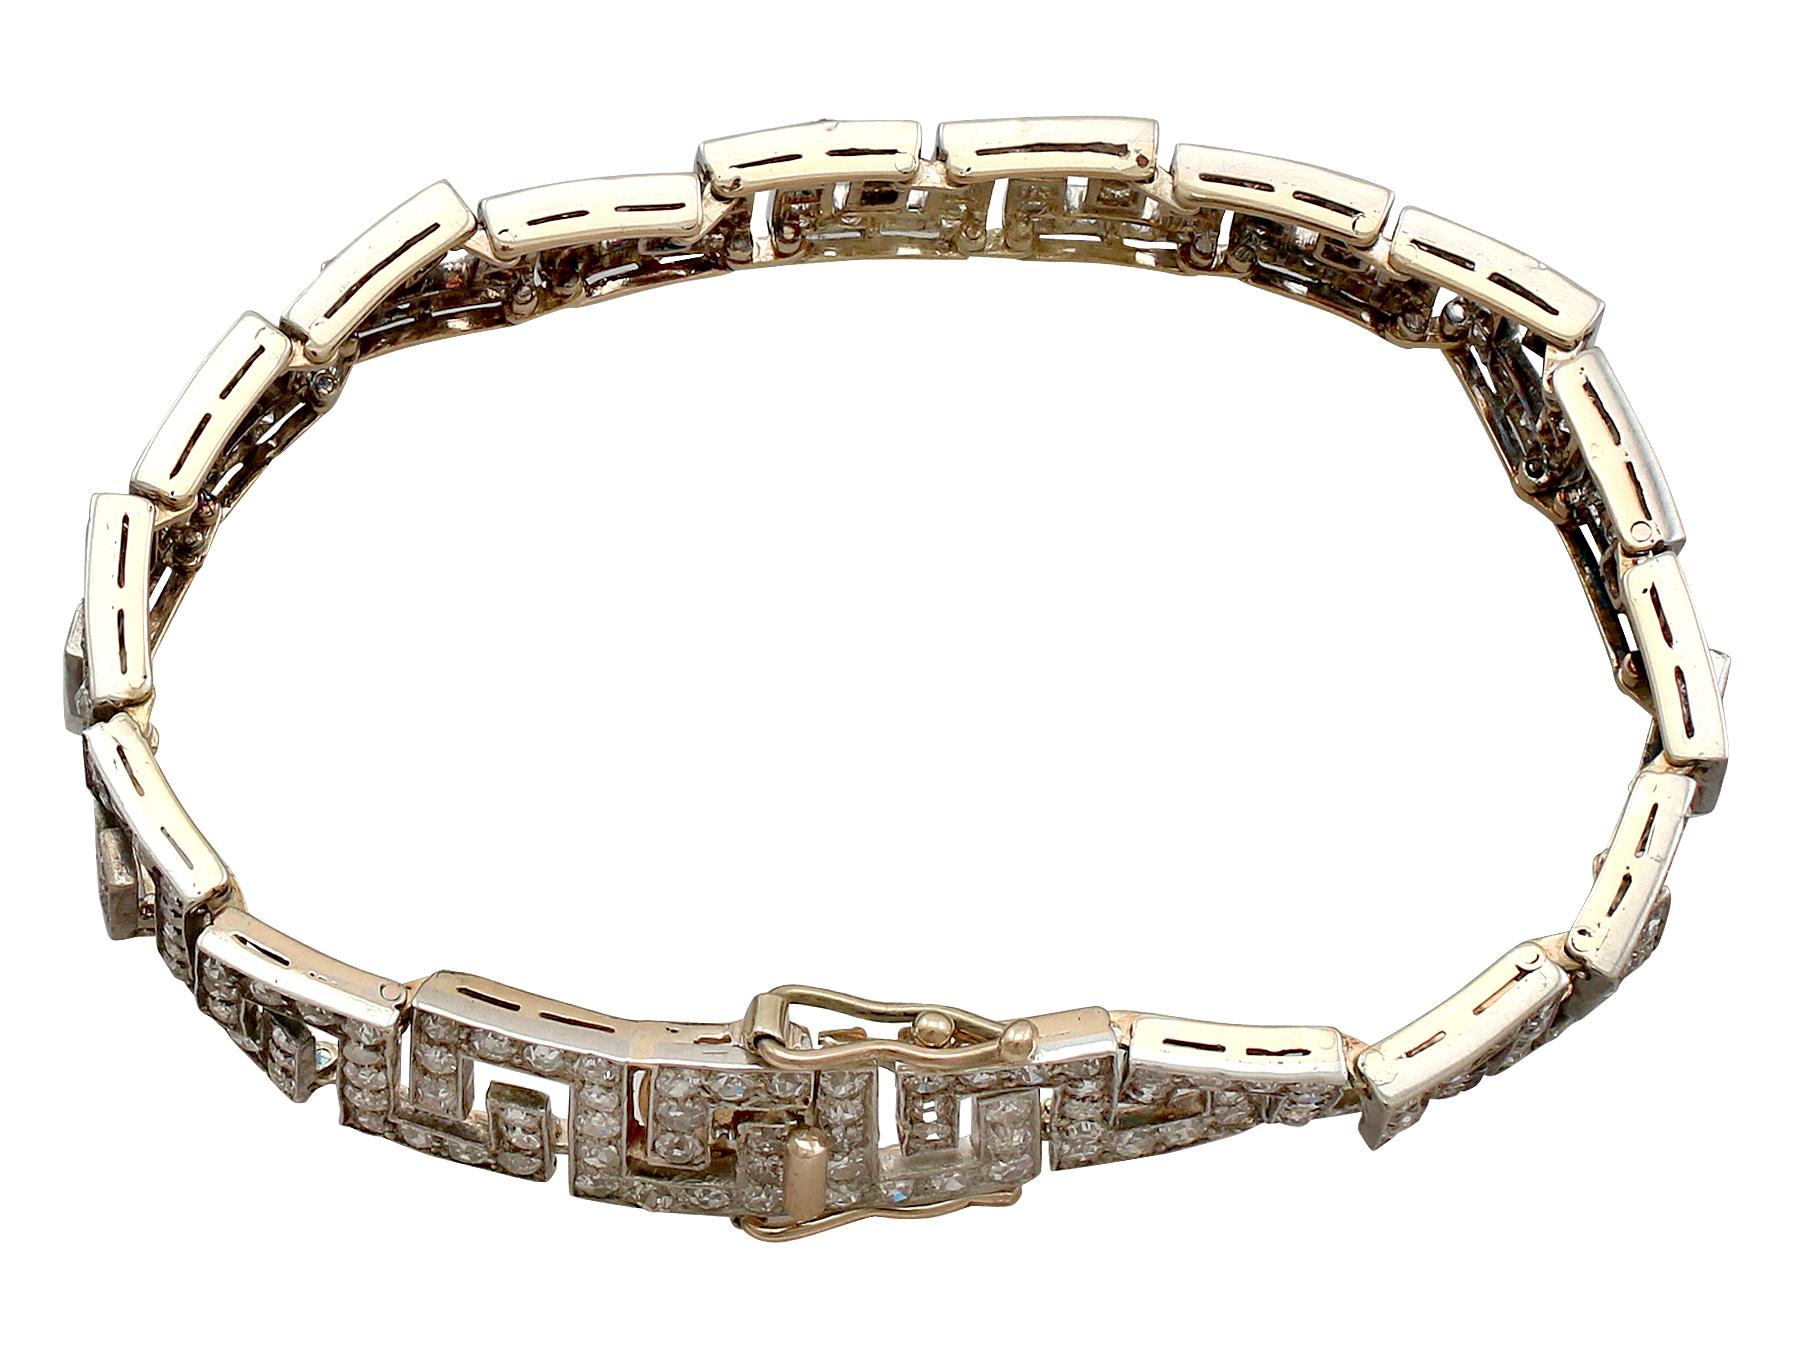 A stunning antique Victorian 10.54 carat diamond and 9 karat yellow gold, silver set bracelet; part of our diverse antique jewellery and estate jewelry collections.

This stunning, fine and impressive diamond Greek key bracelet has been crafted in